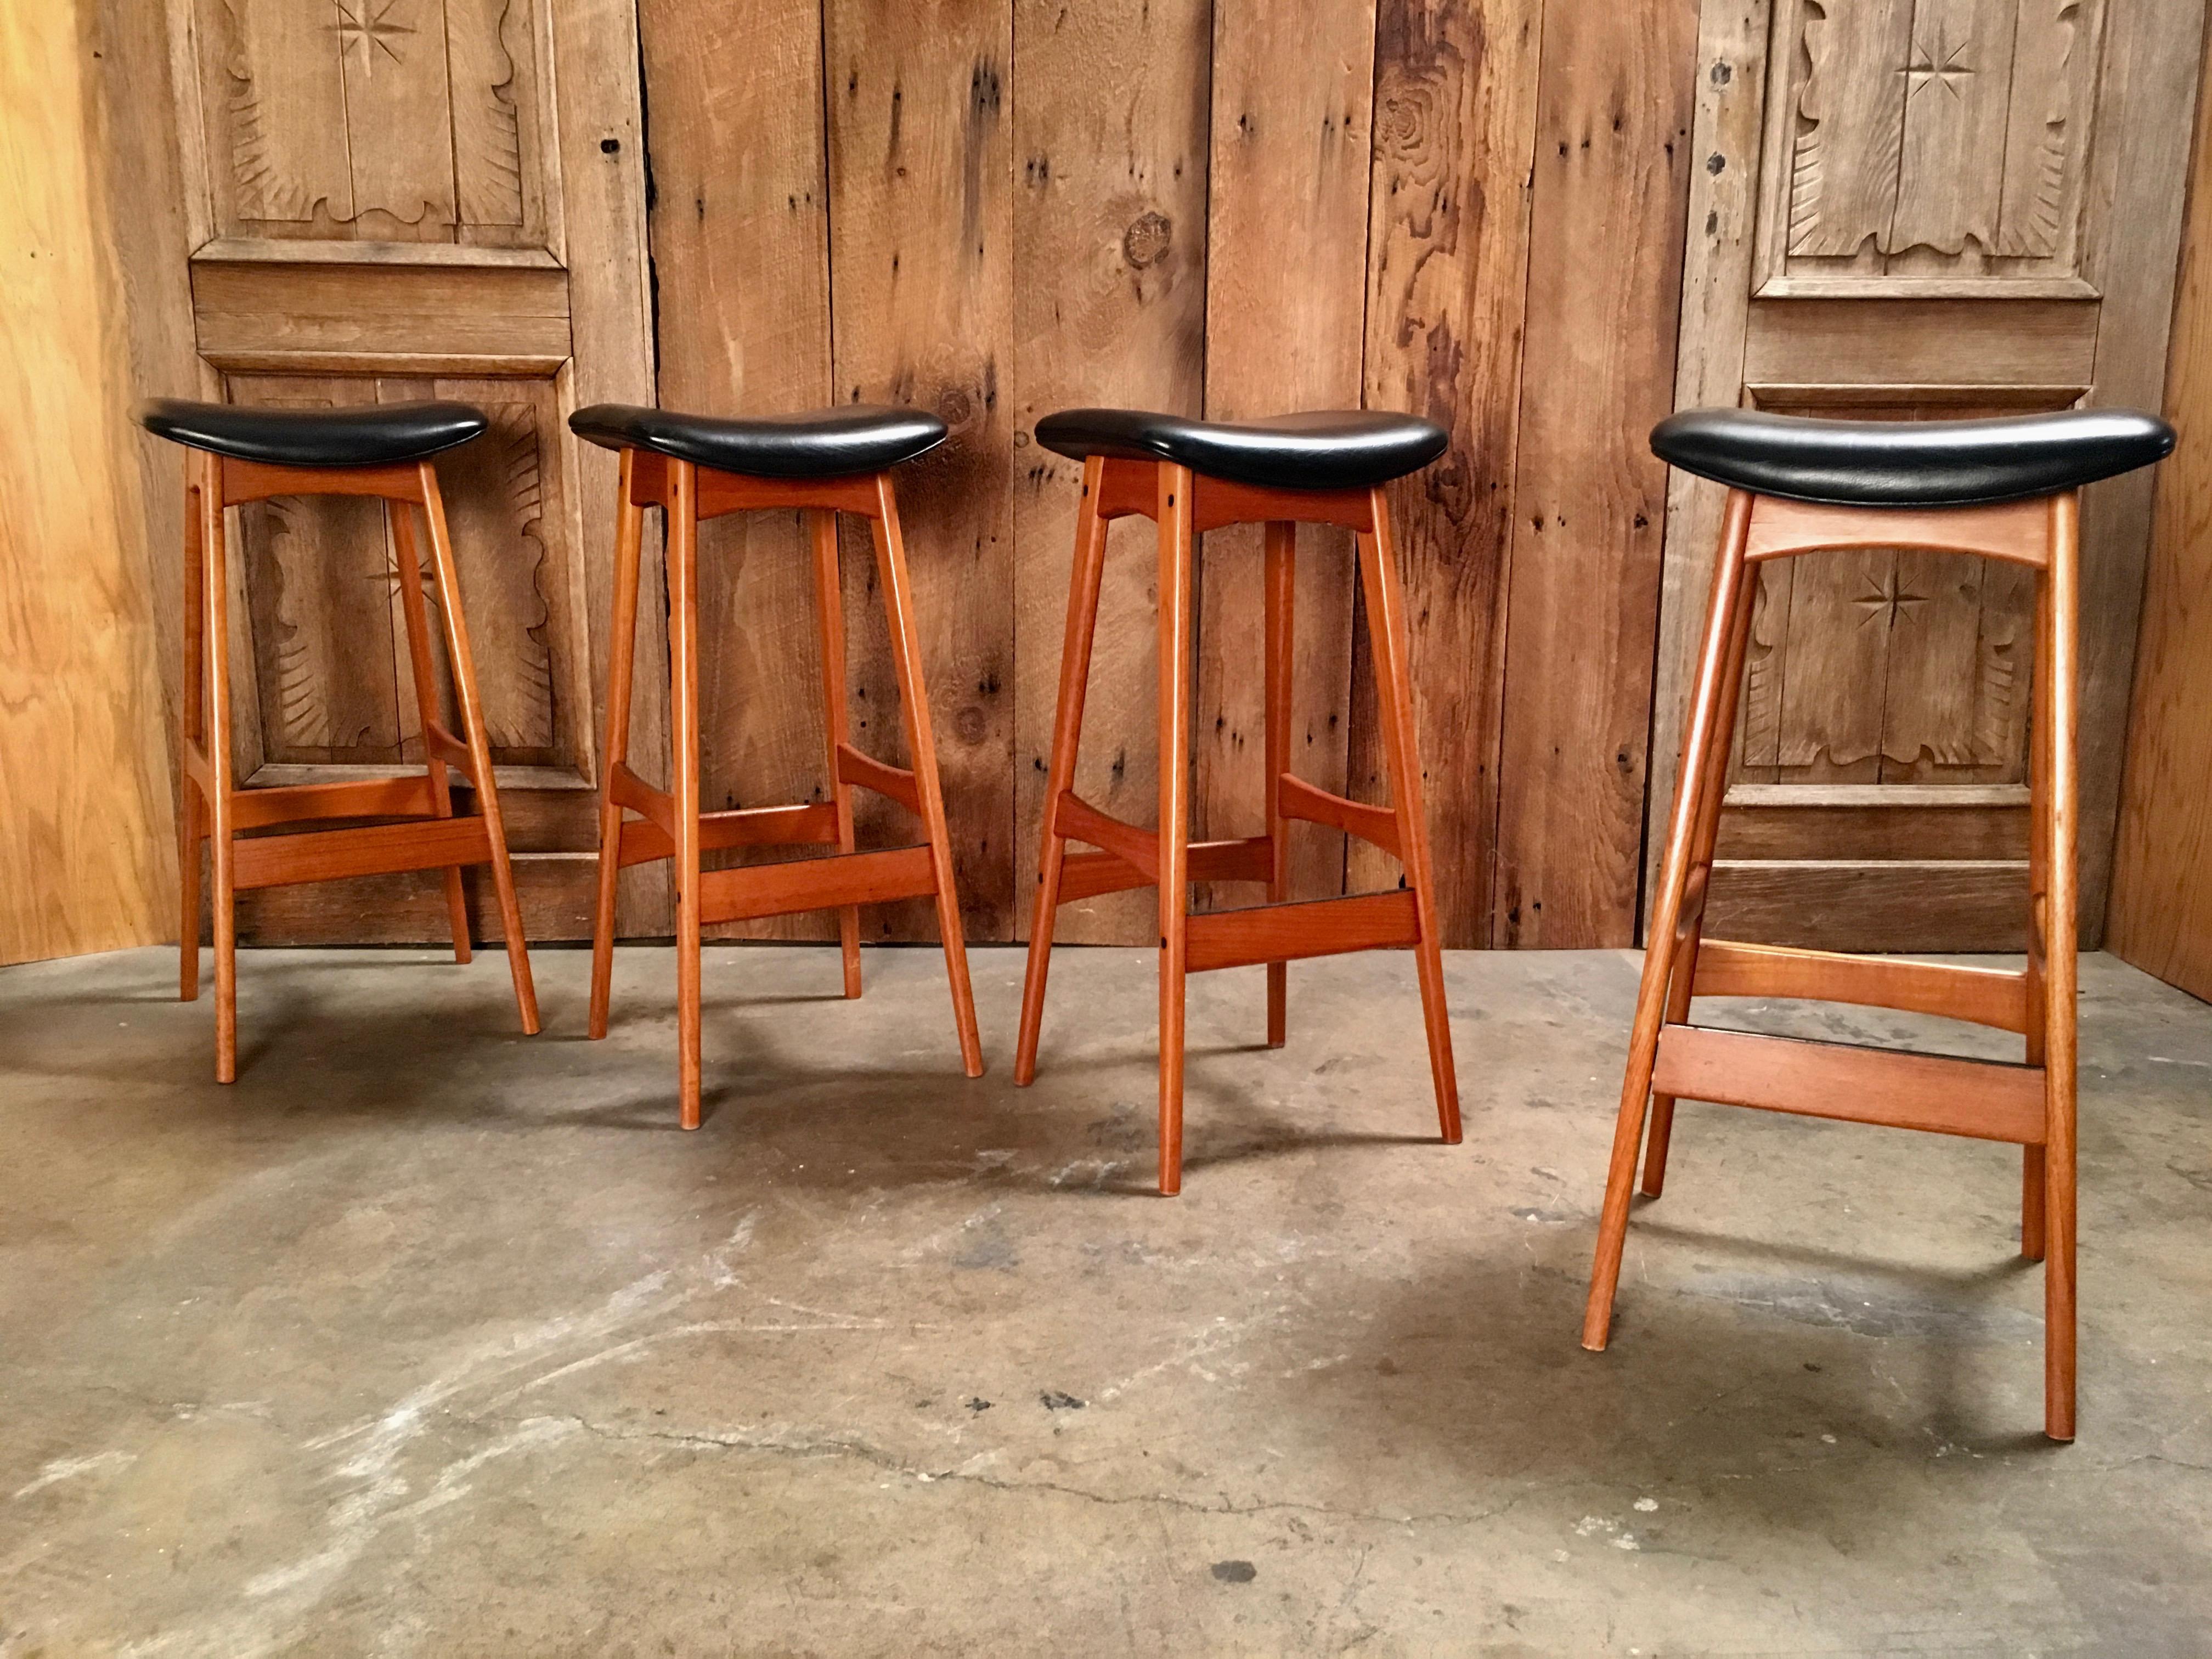 Set of four Mid-Century Modern teak stools with black metal protector on the footrest and black vinyl seats.